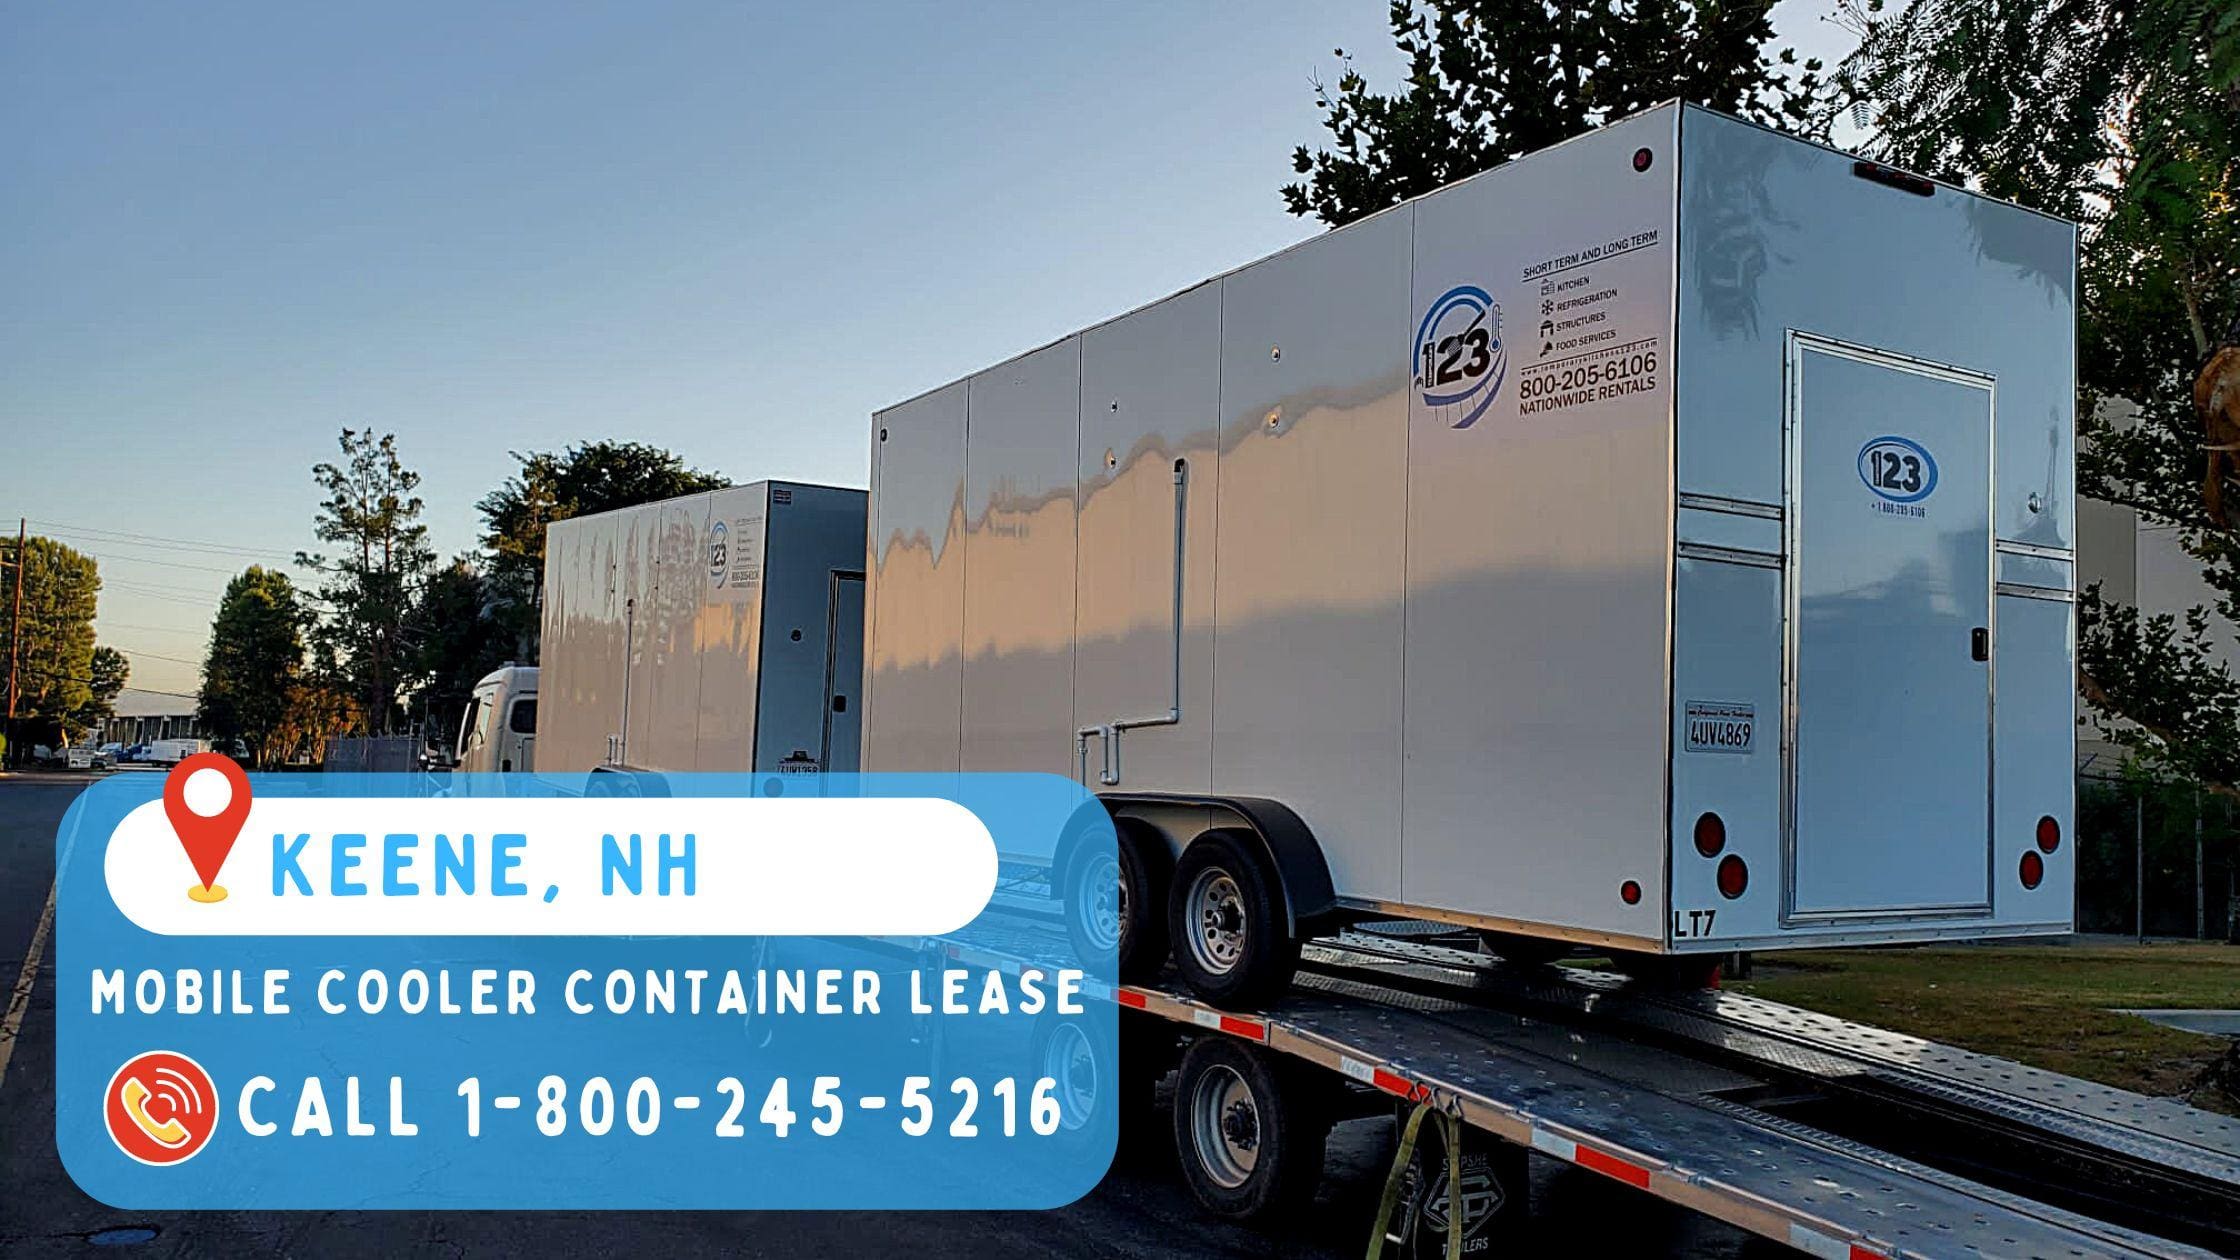 Mobile Cooler Container Lease in Keene